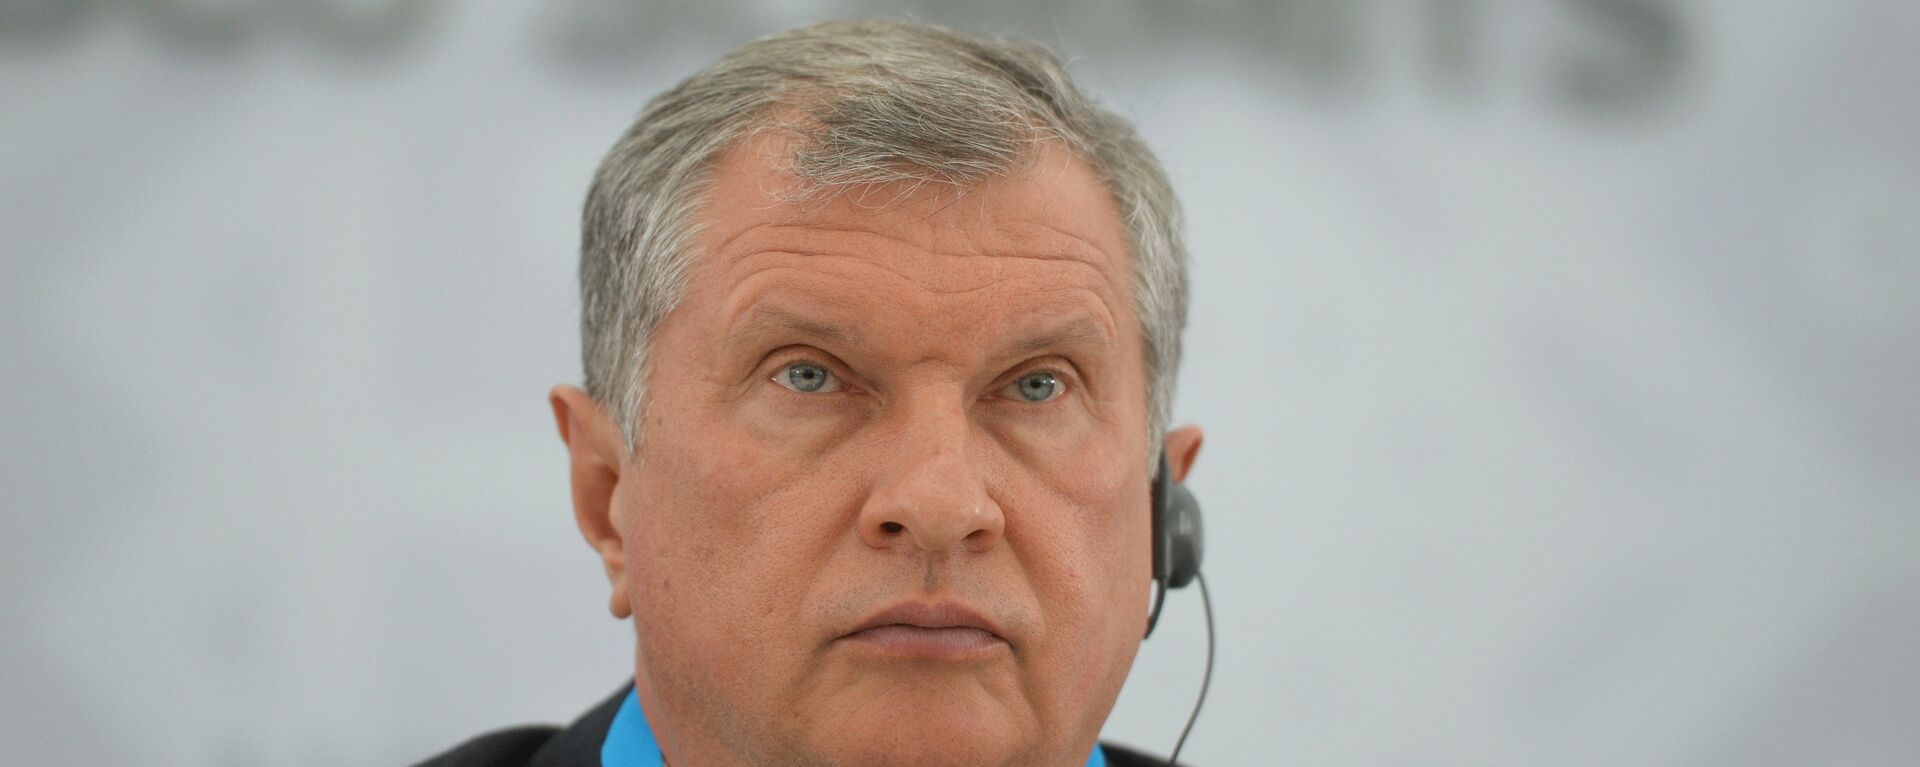 President and Chairman of the Board of JSC Rosneft Igor Sechin at a briefing on signing a long-term contract for oil deliveries between Rosneft and Essar oil LTD - Sputnik International, 1920, 17.06.2023